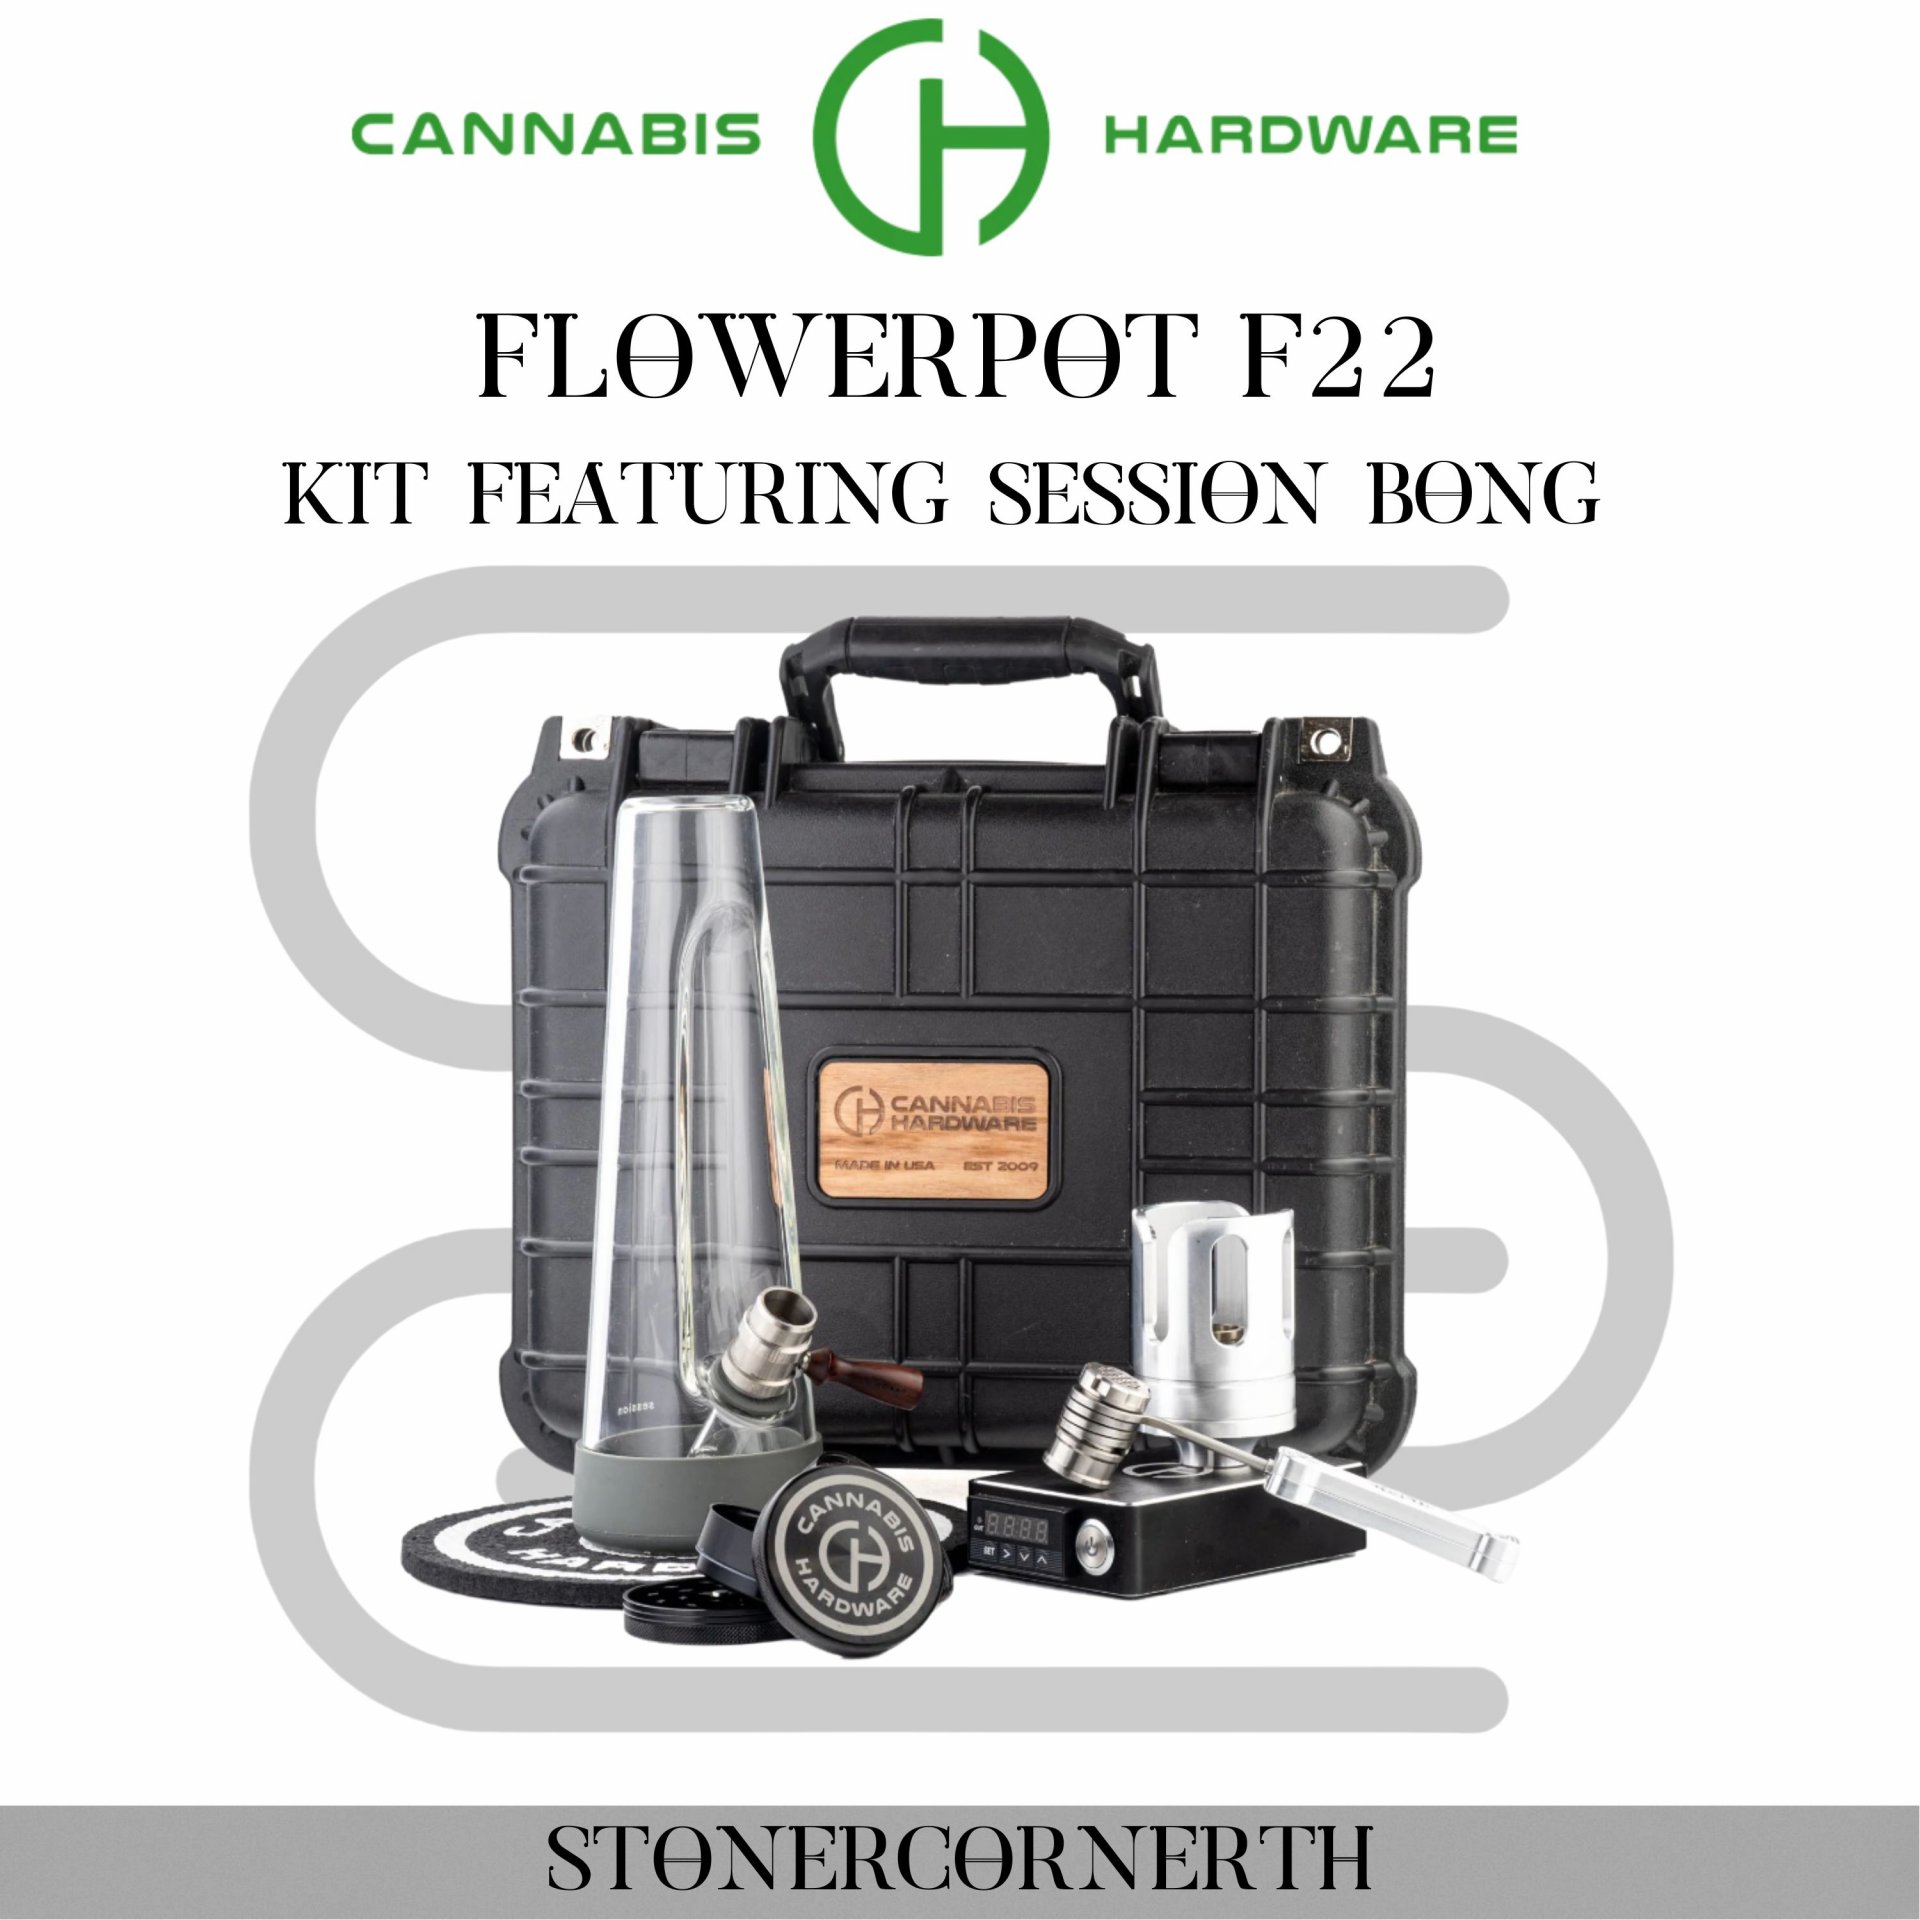 Cannabis Hardware | Flowerpot f22 kit with session bong - your new end game is here FlowerPot